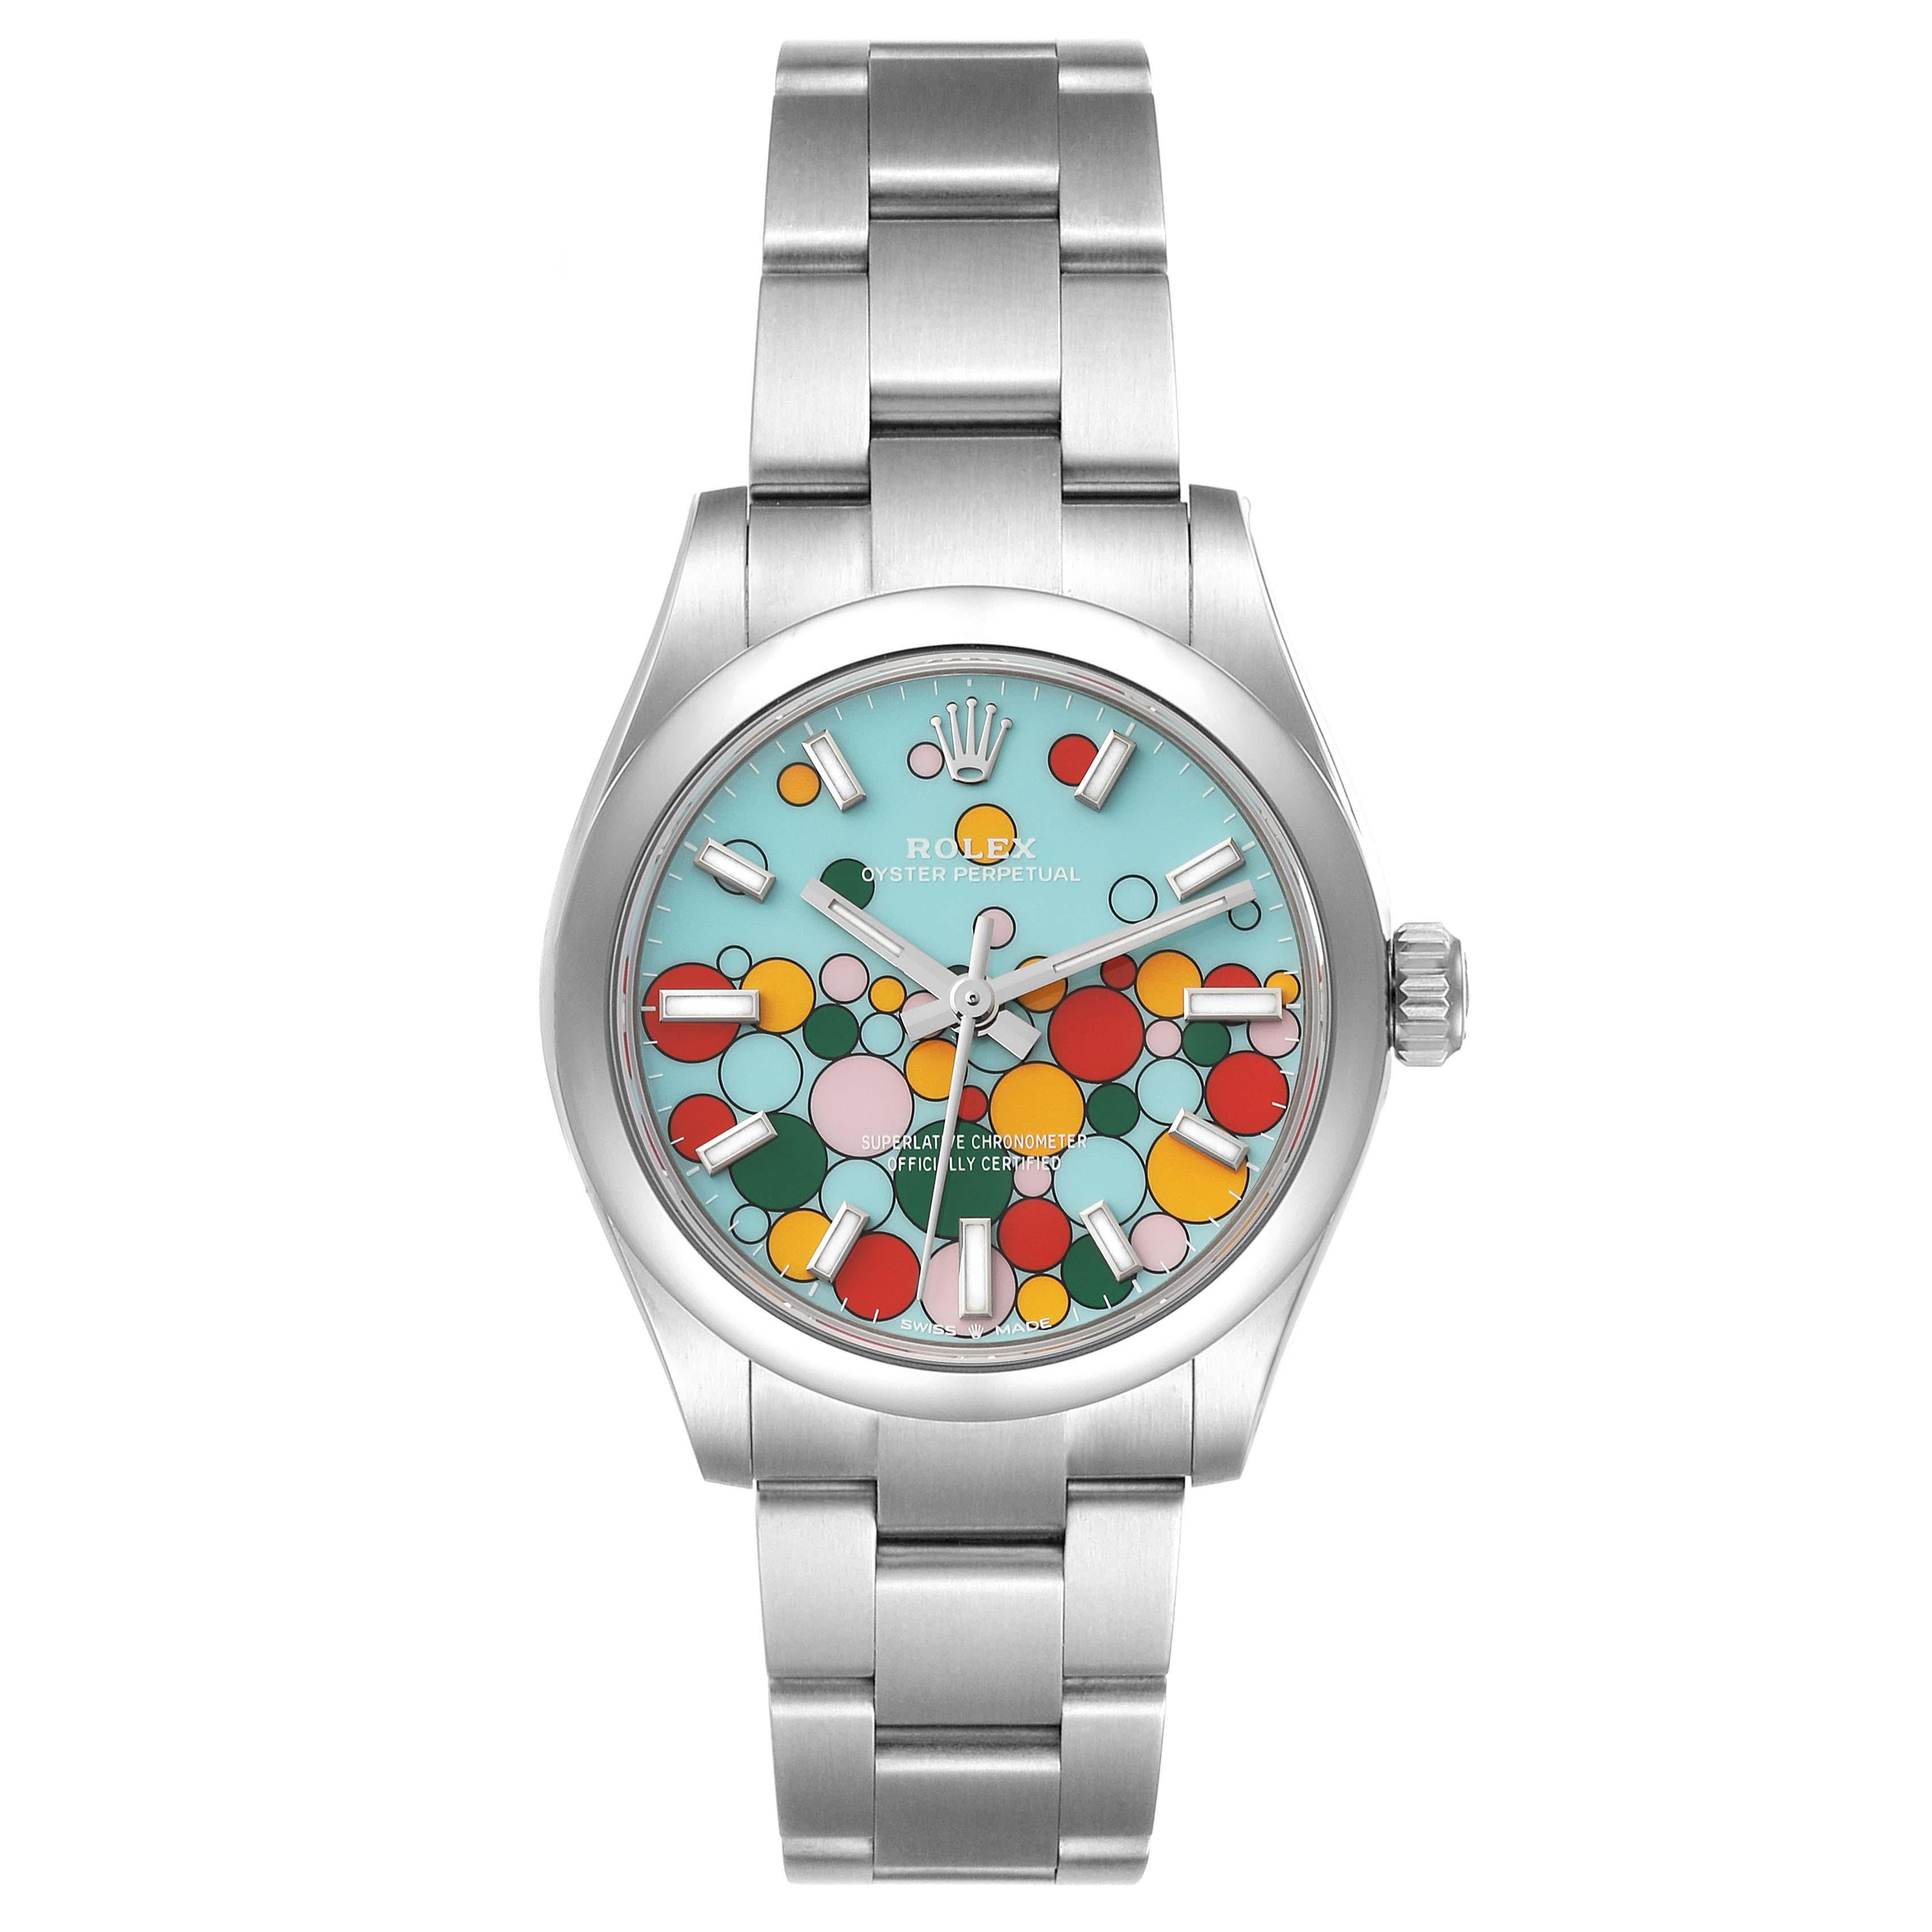 Rolex Oyster Perpetual Midsize Celebration Dial Steel Ladies Watch 277200 Unworn. Automatic self-winding movement. Stainless steel oyster case 31.0 mm in diameter. Rolex logo on a crown. Stainless steel smooth bezel. Scratch resistant sapphire